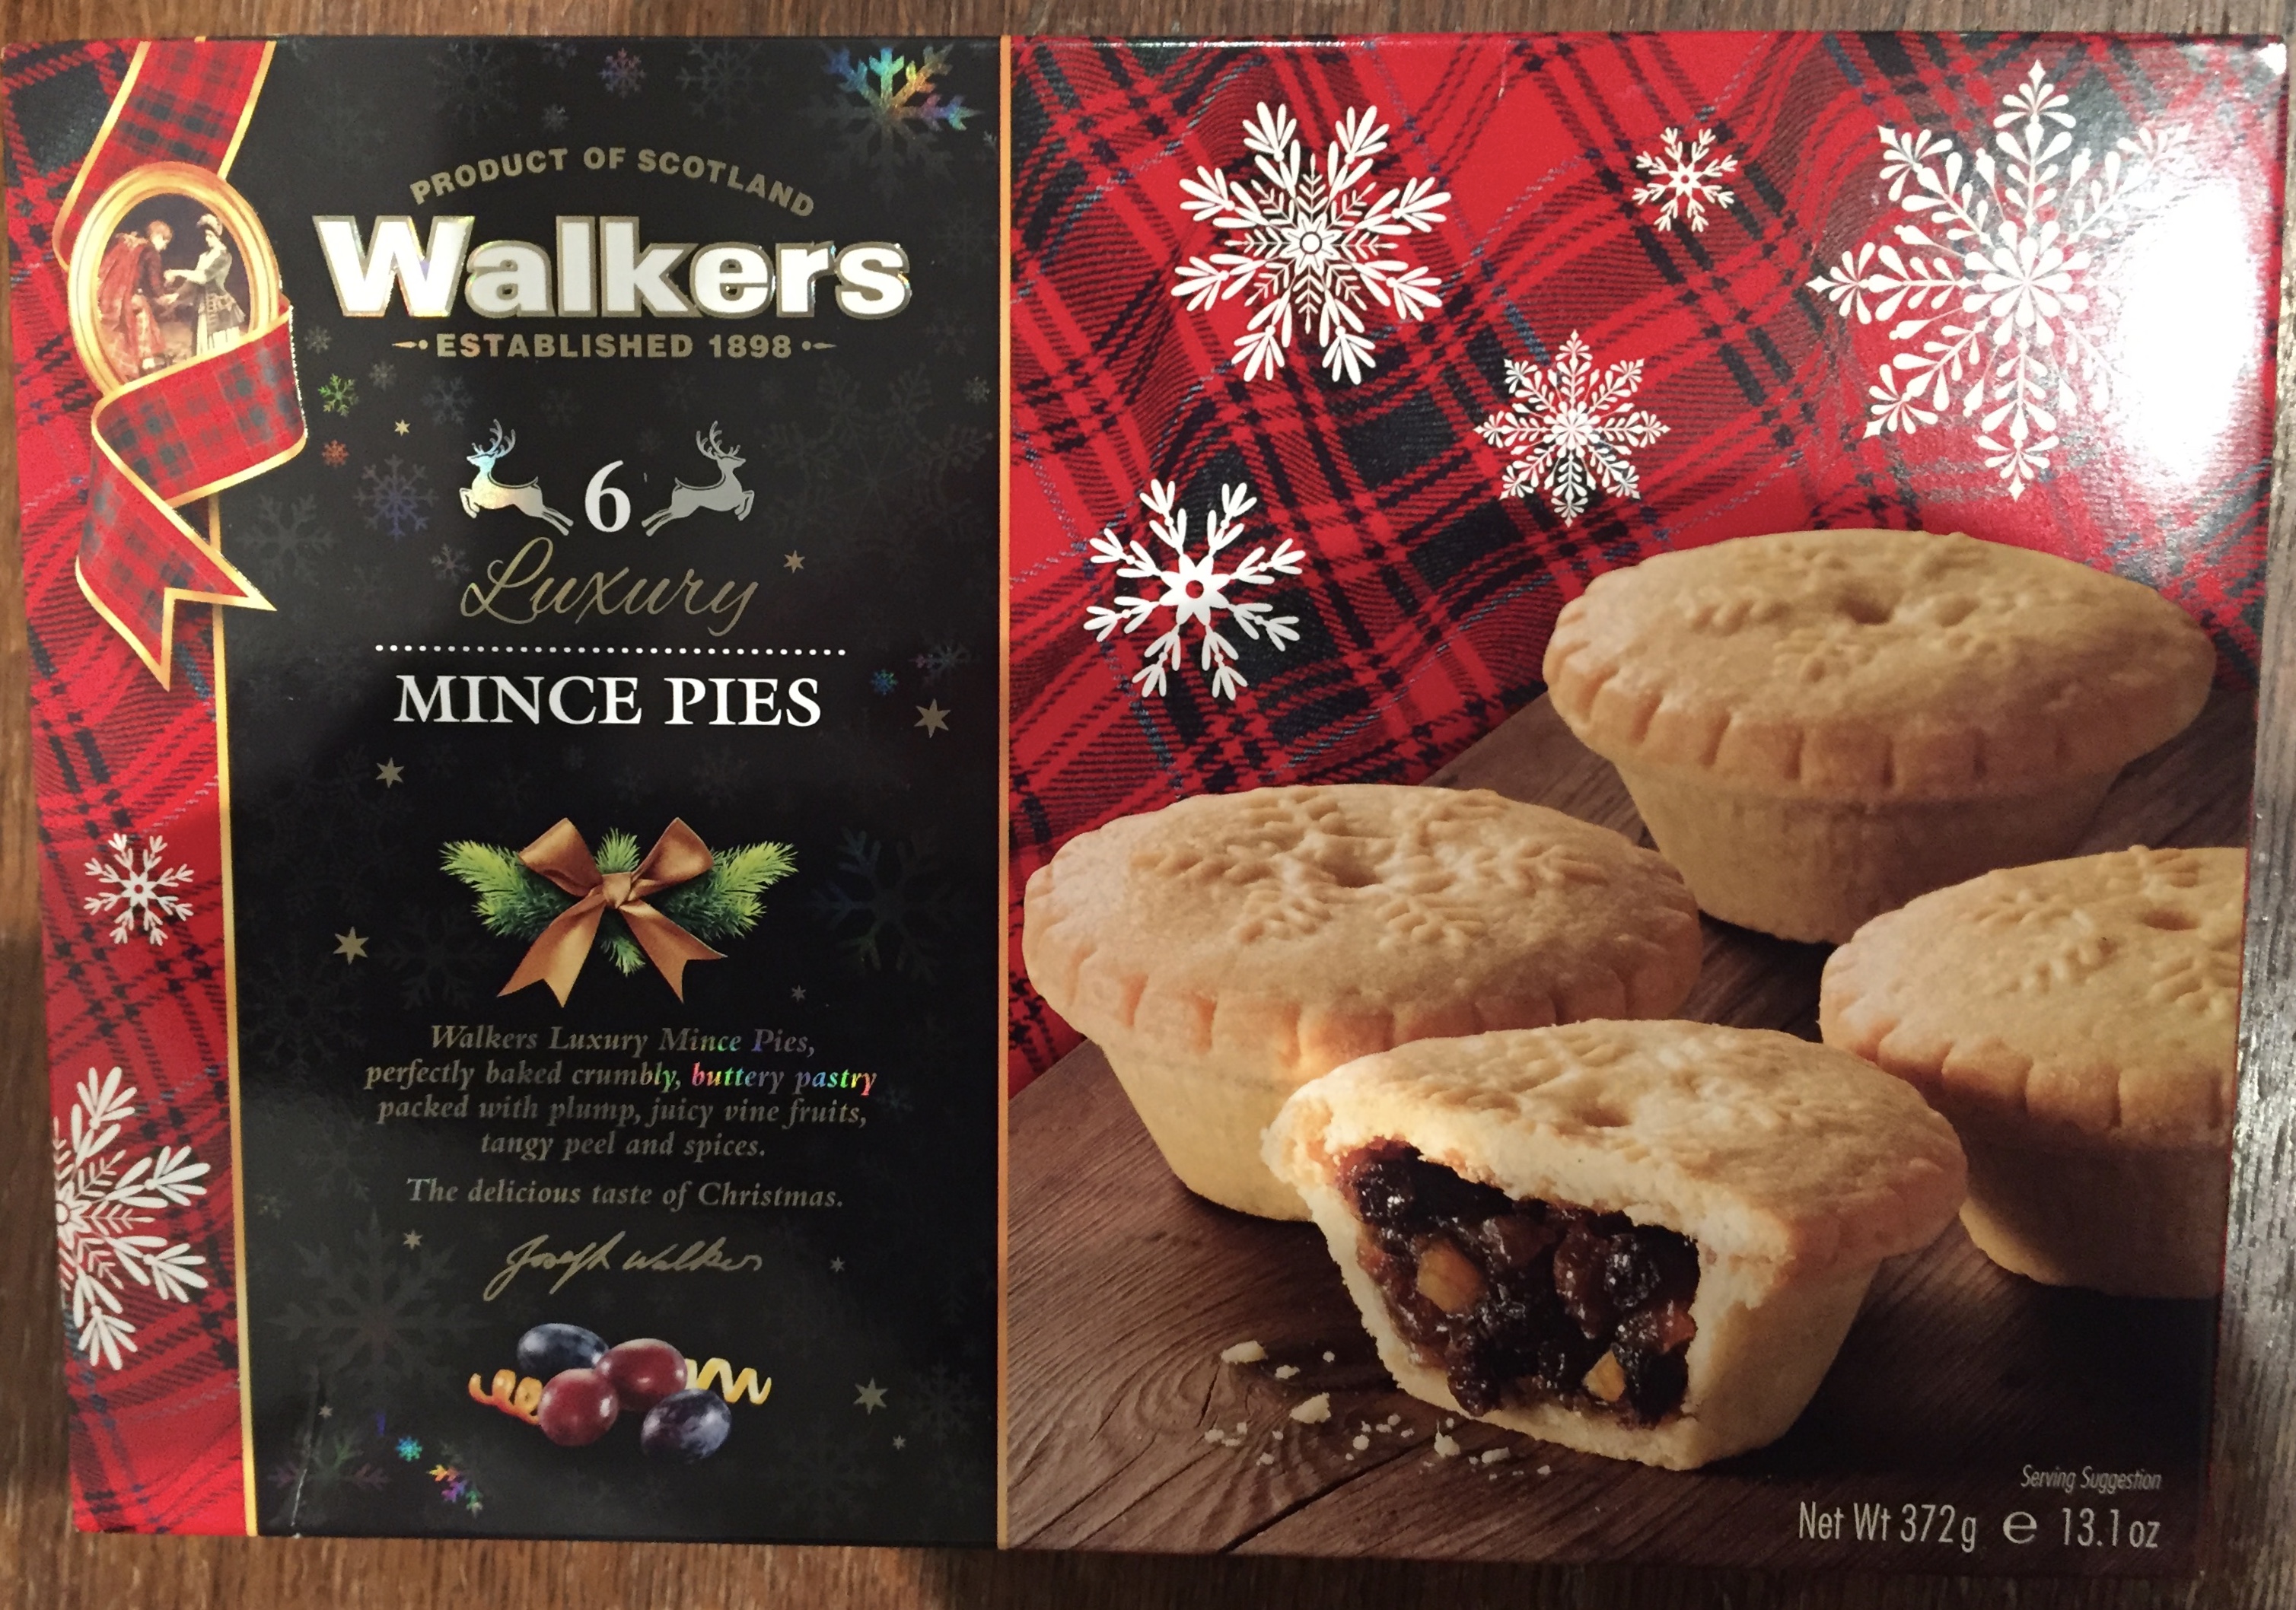 Pack of 6 Luxury Mince Pies from Walkers Shortbread. They are described on the box as having perfectly baked crumbly, buttery pastry packed with plump, juicy vine fruits, tangy peel and spices.